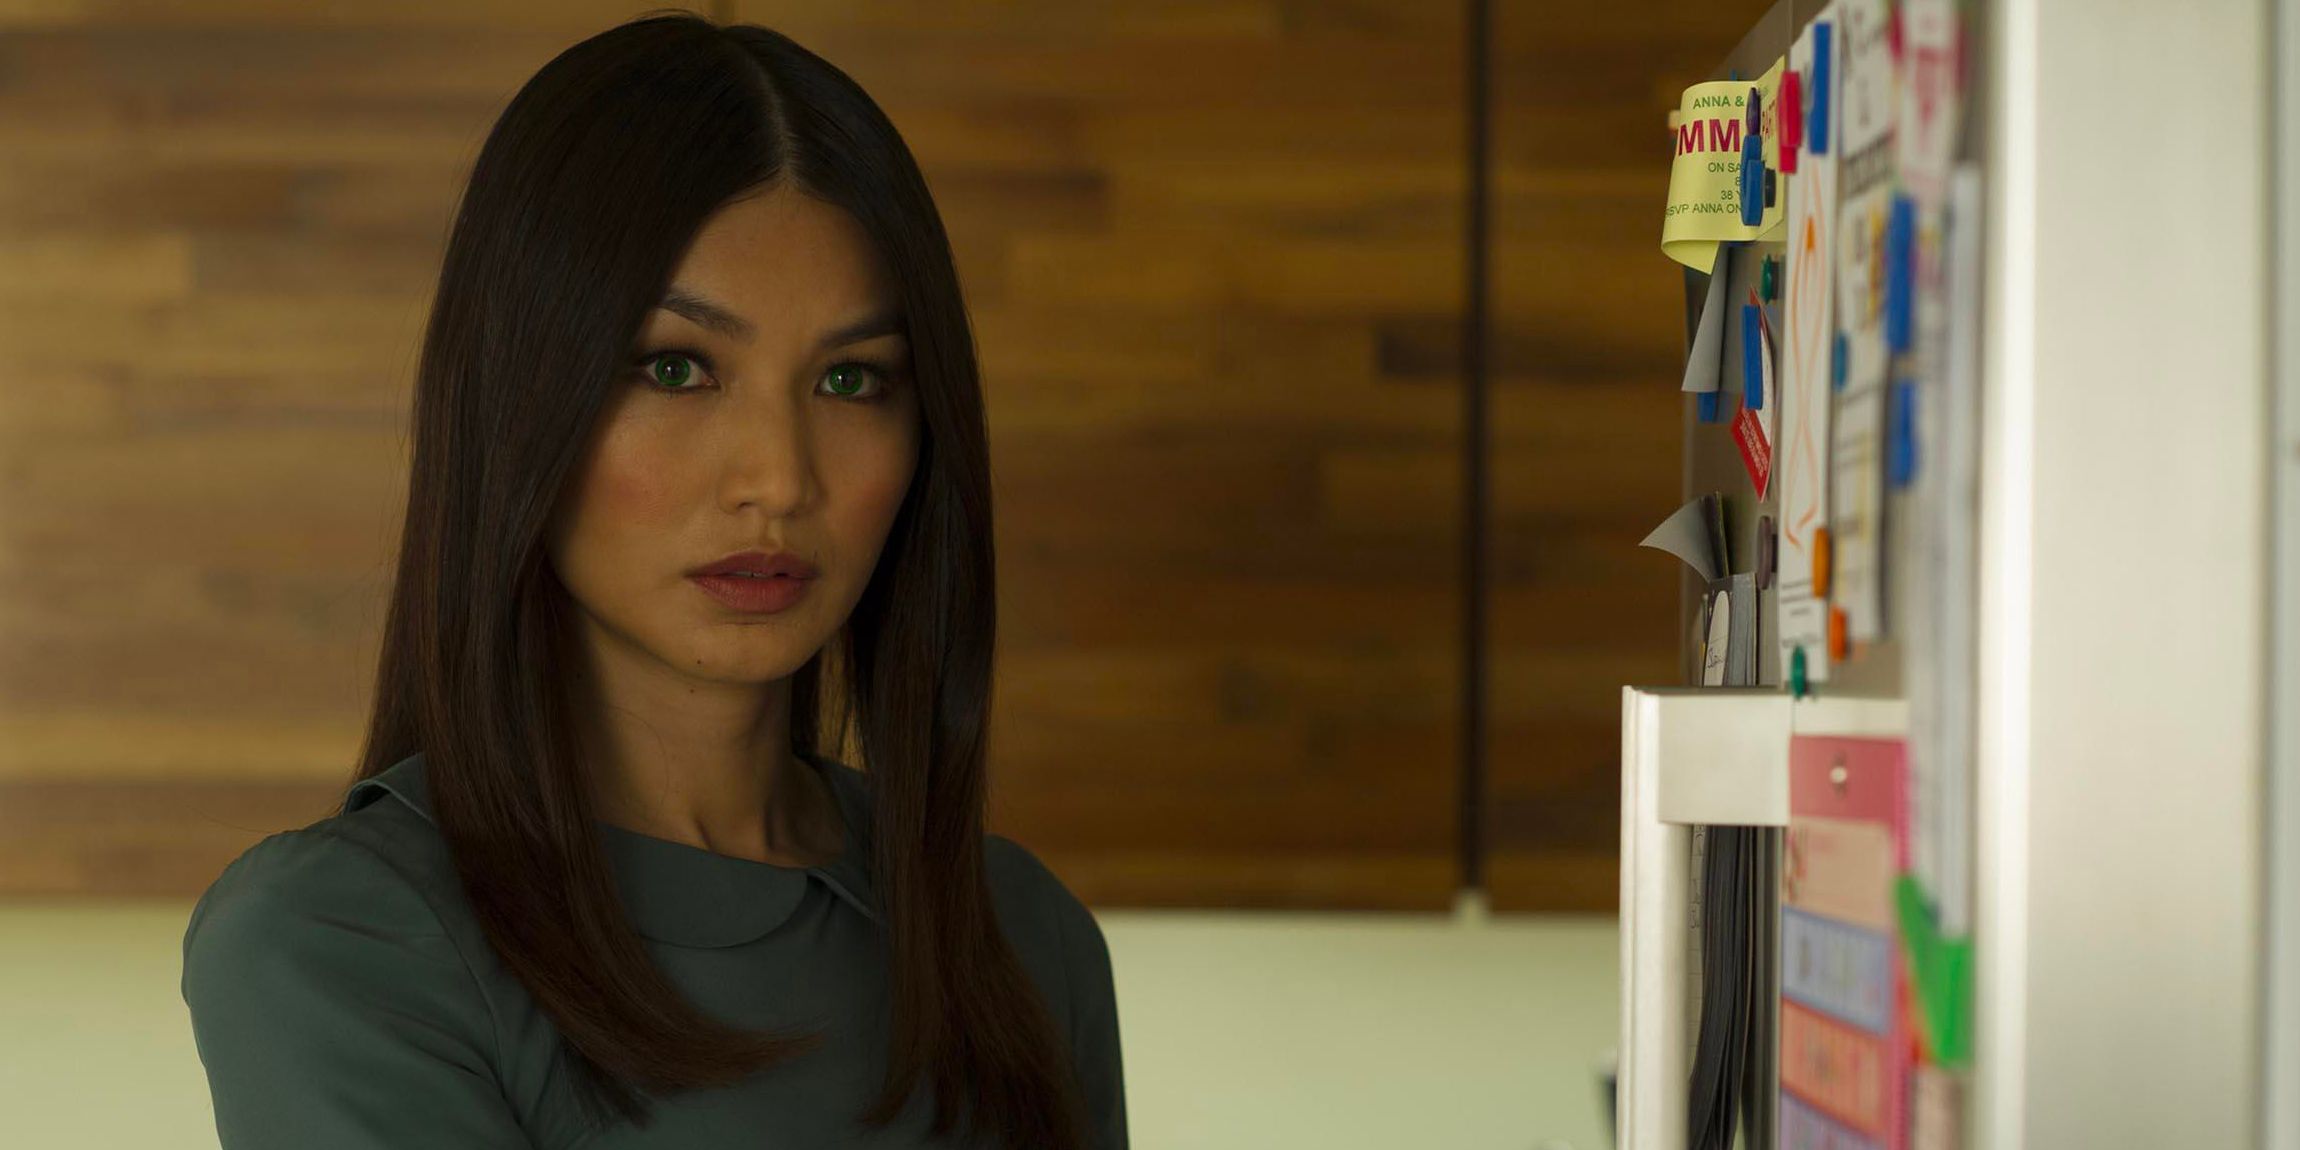 A woman smiling, standing by a fridge in a scene from Humans.